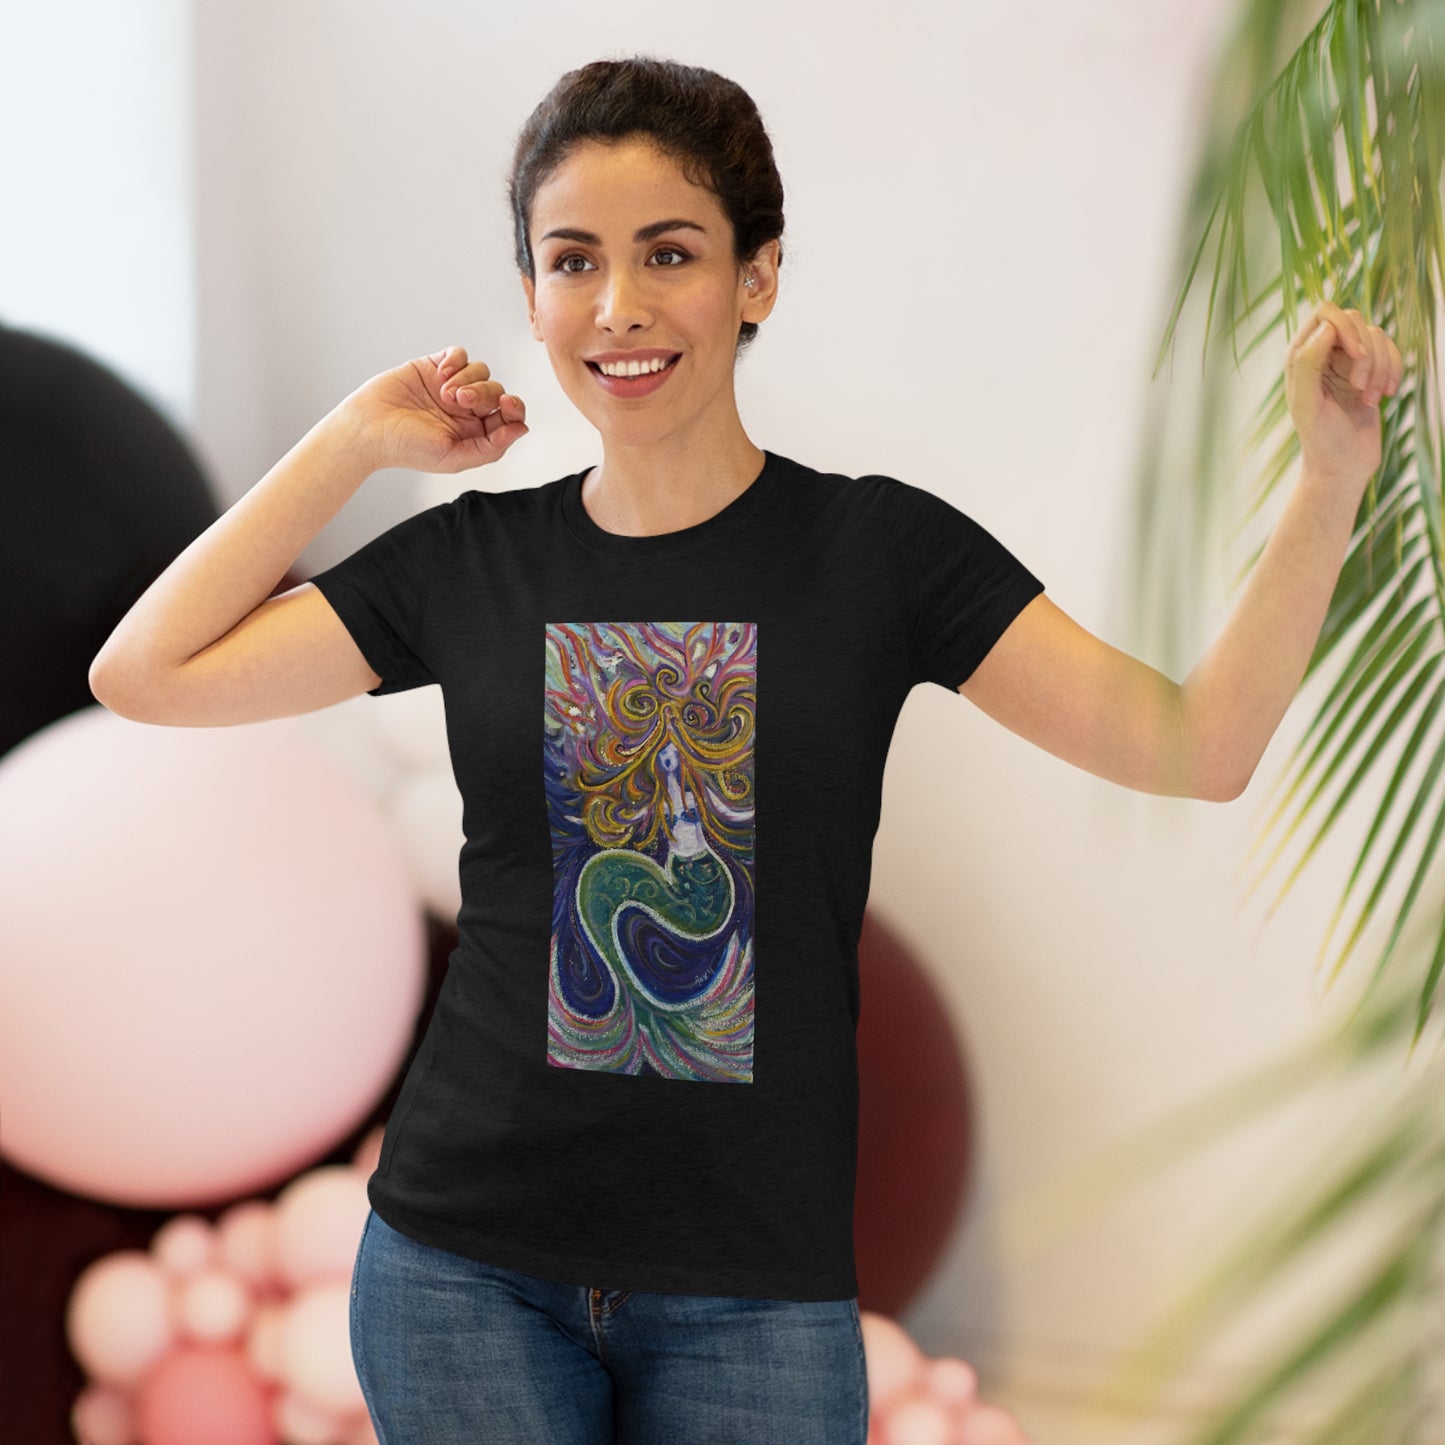 The Mermaid Women's fitted Triblend Tee  tee shirt